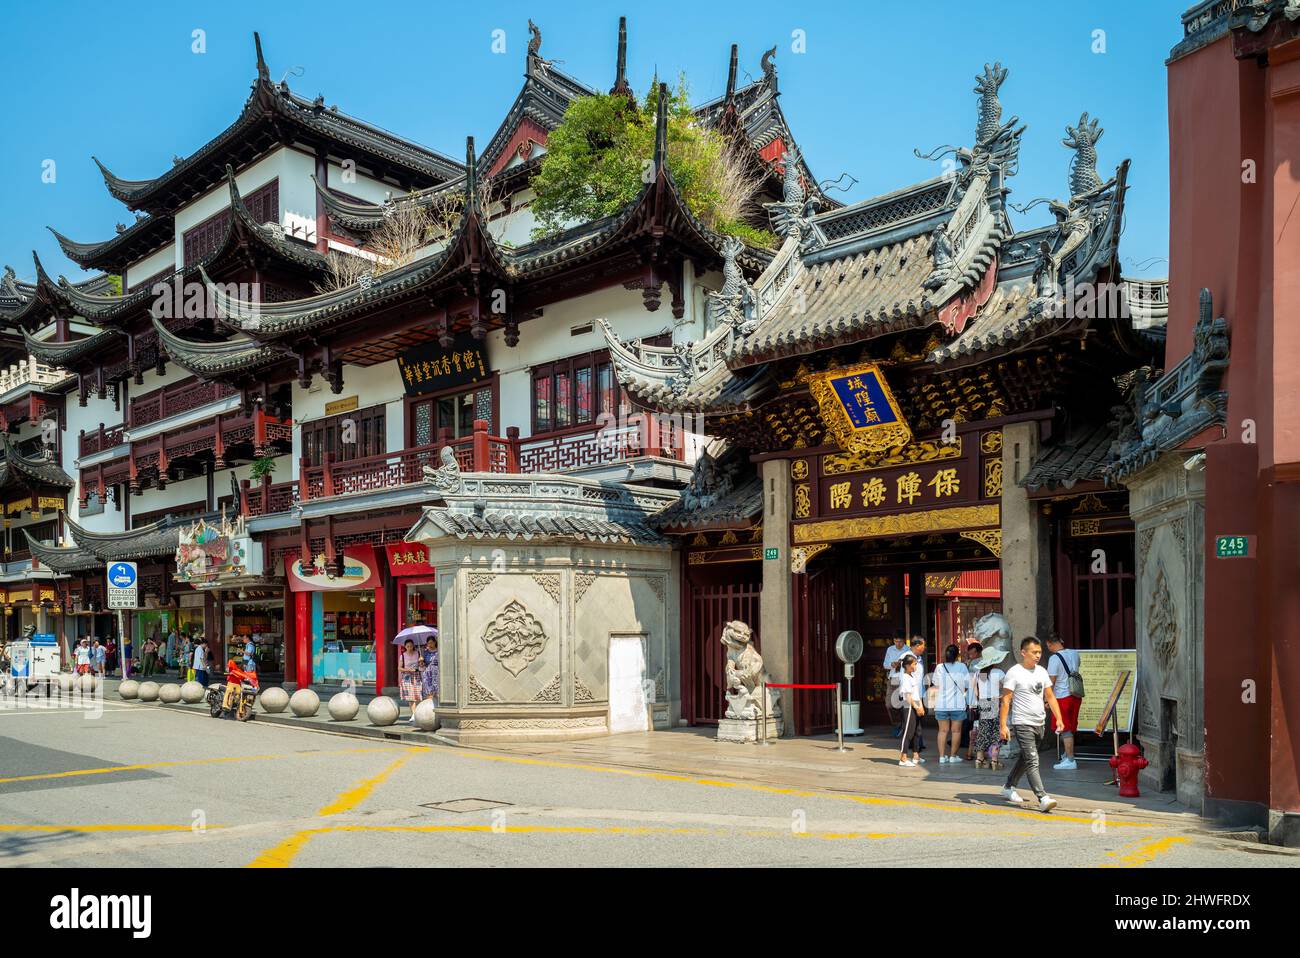 July 27, 2018: New City God Temple of Shanghai, the most significant  folk temple located near the Yu Garden in the old city of Shanghai, China. It ha Stock Photo